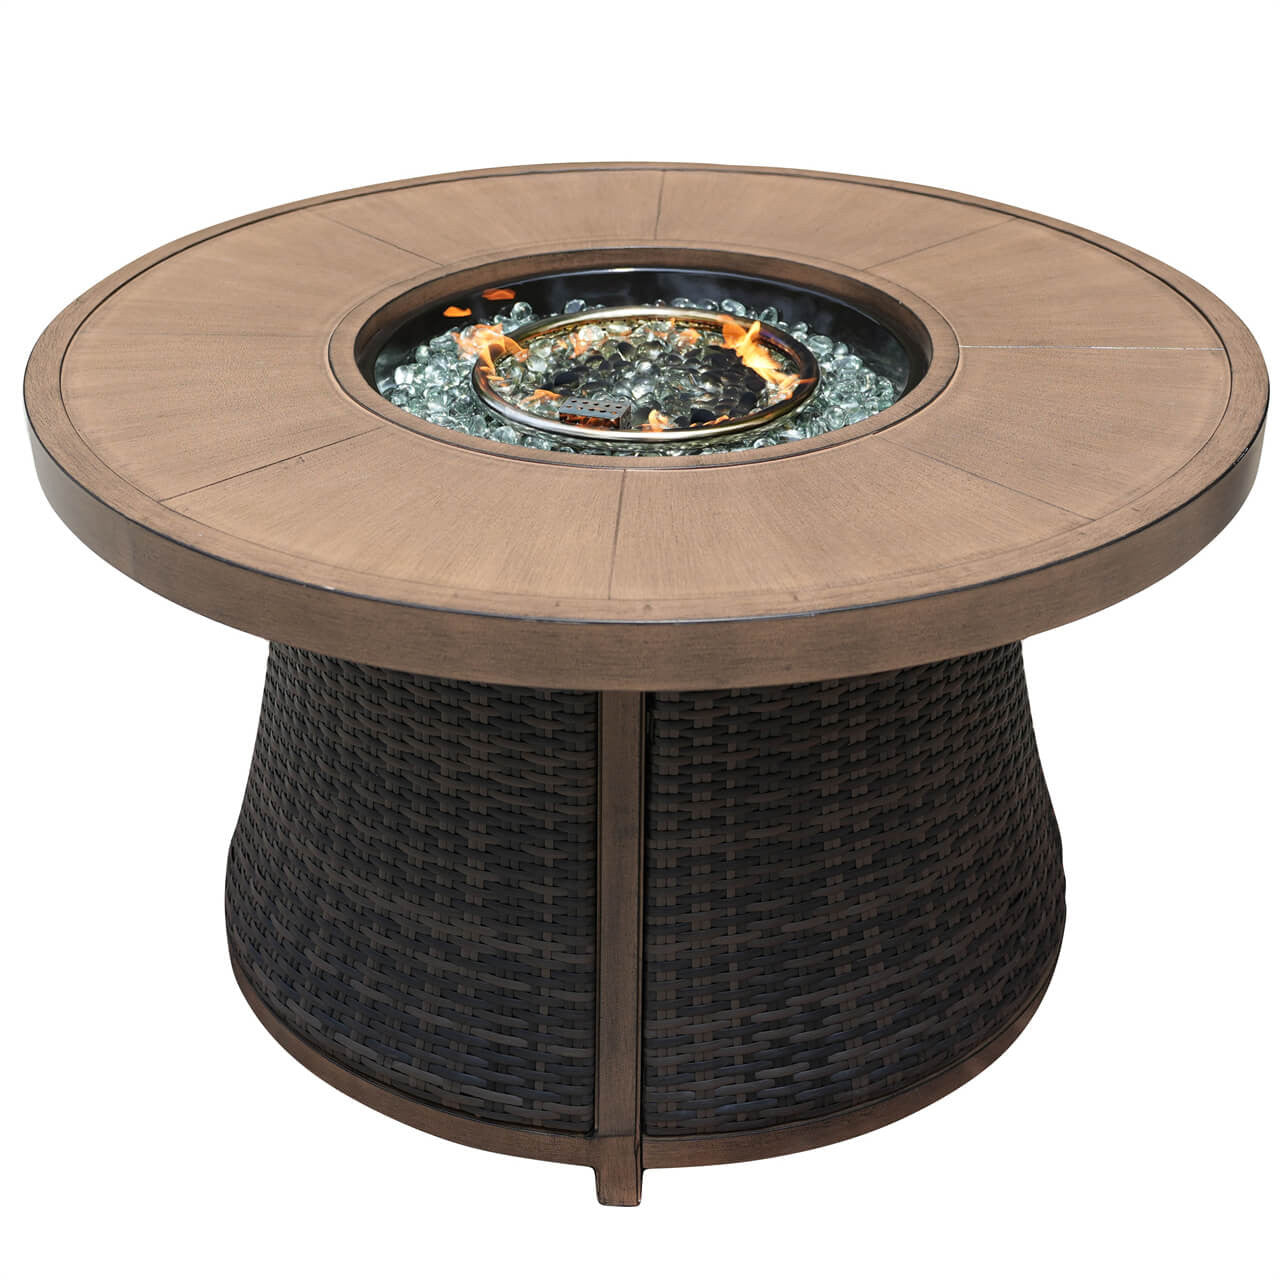 Direct Wicker Aluminum Round Propane Fire Pit Table with Hidden Fuel Tank